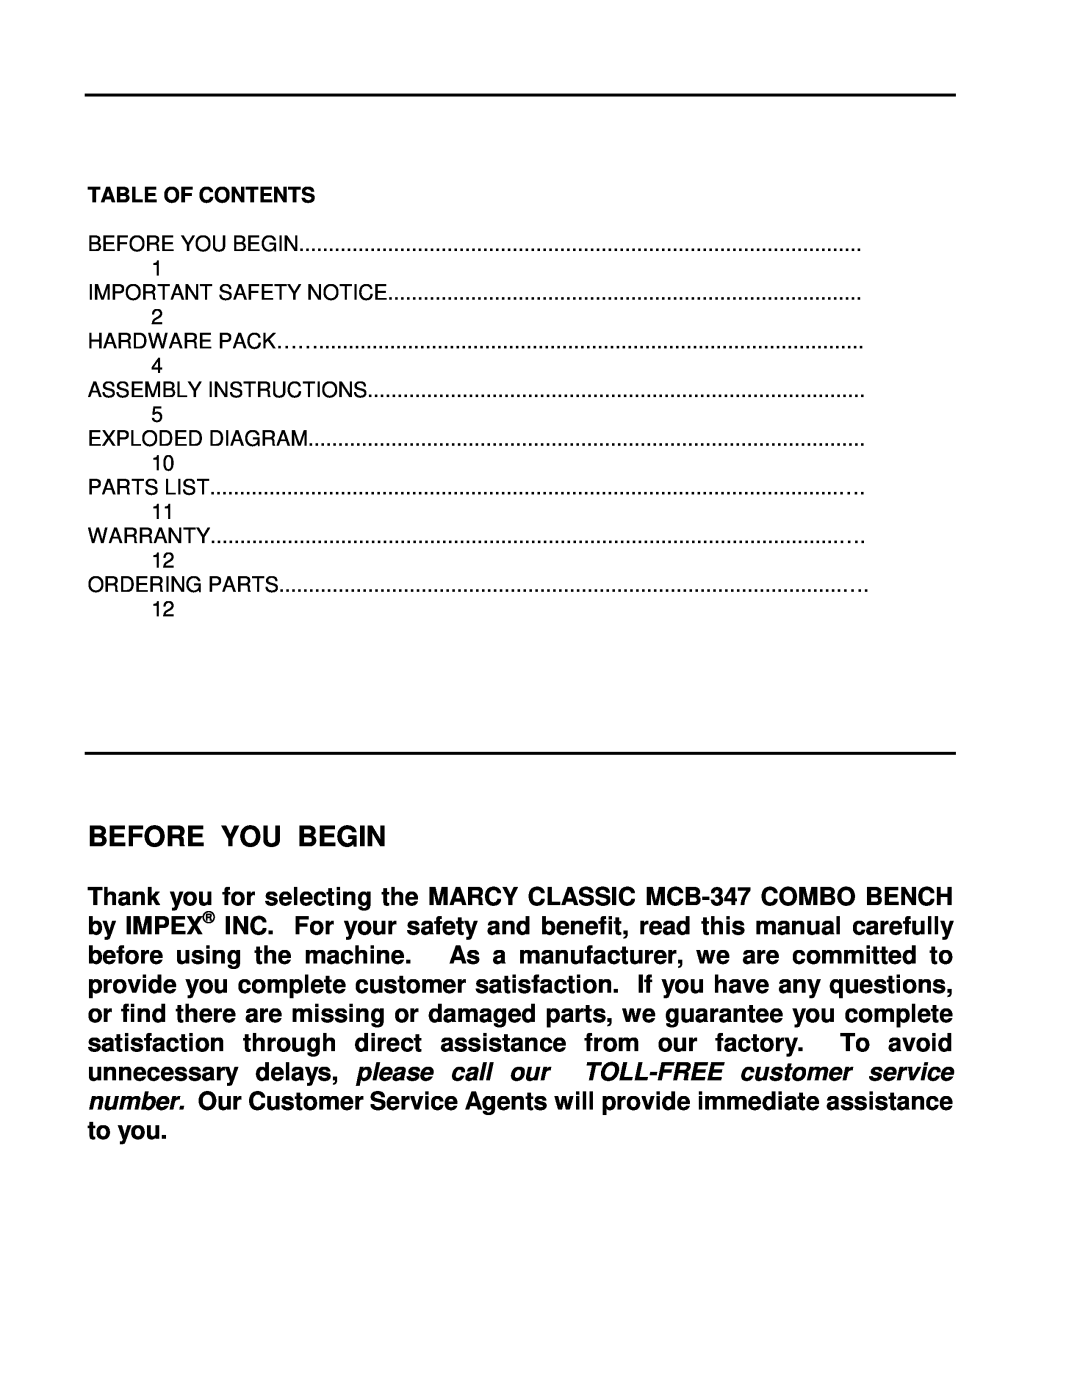 Impex MCB-347 manual Before You Begin, Table Of Contents 